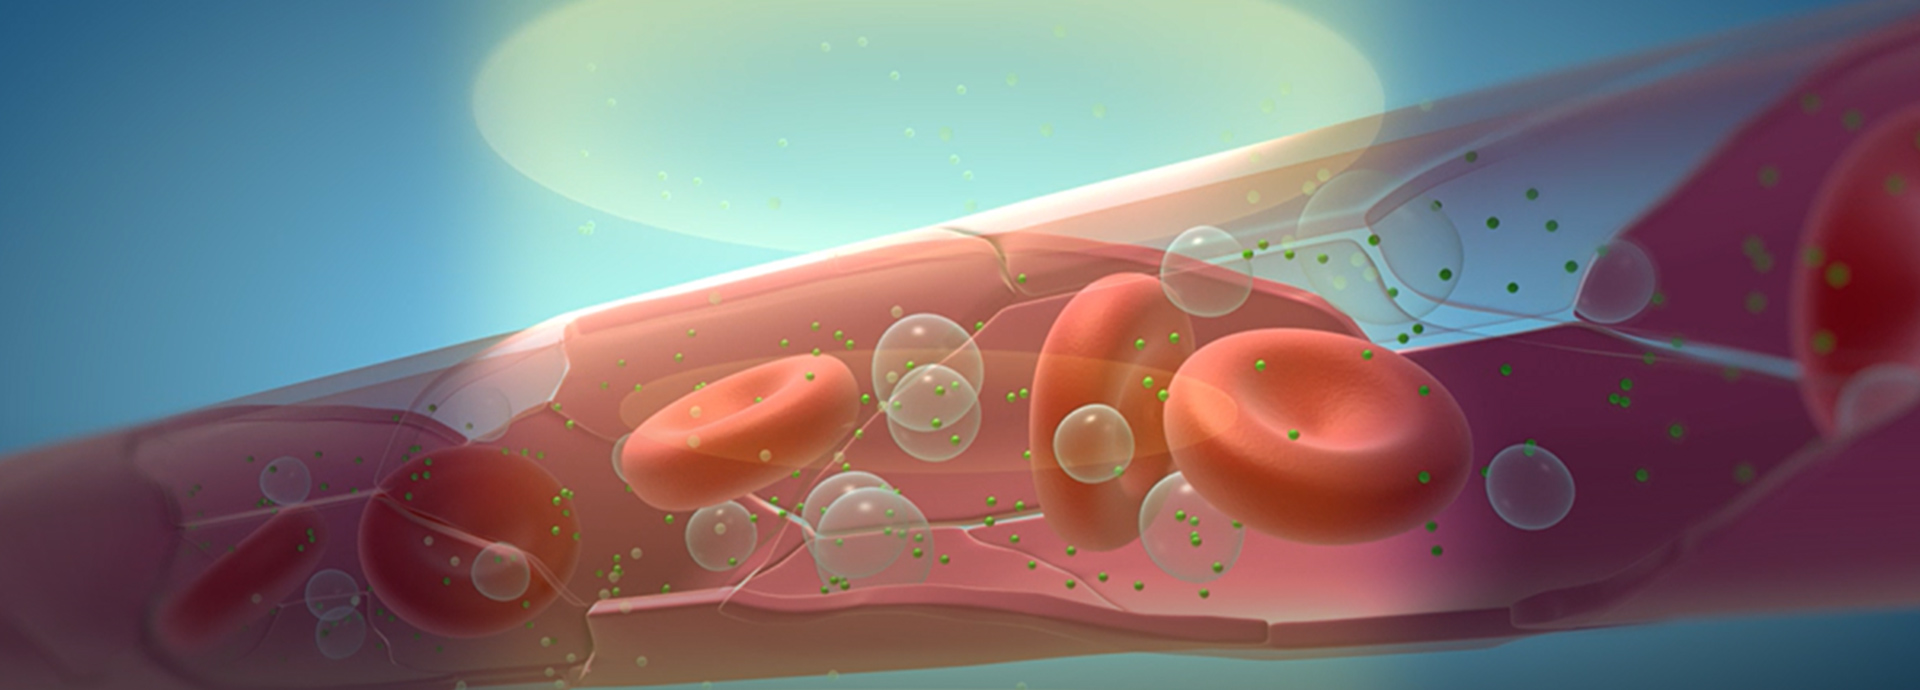 Developed DDS that is effective and has few side effects by microbubbles and ultrasonic waves